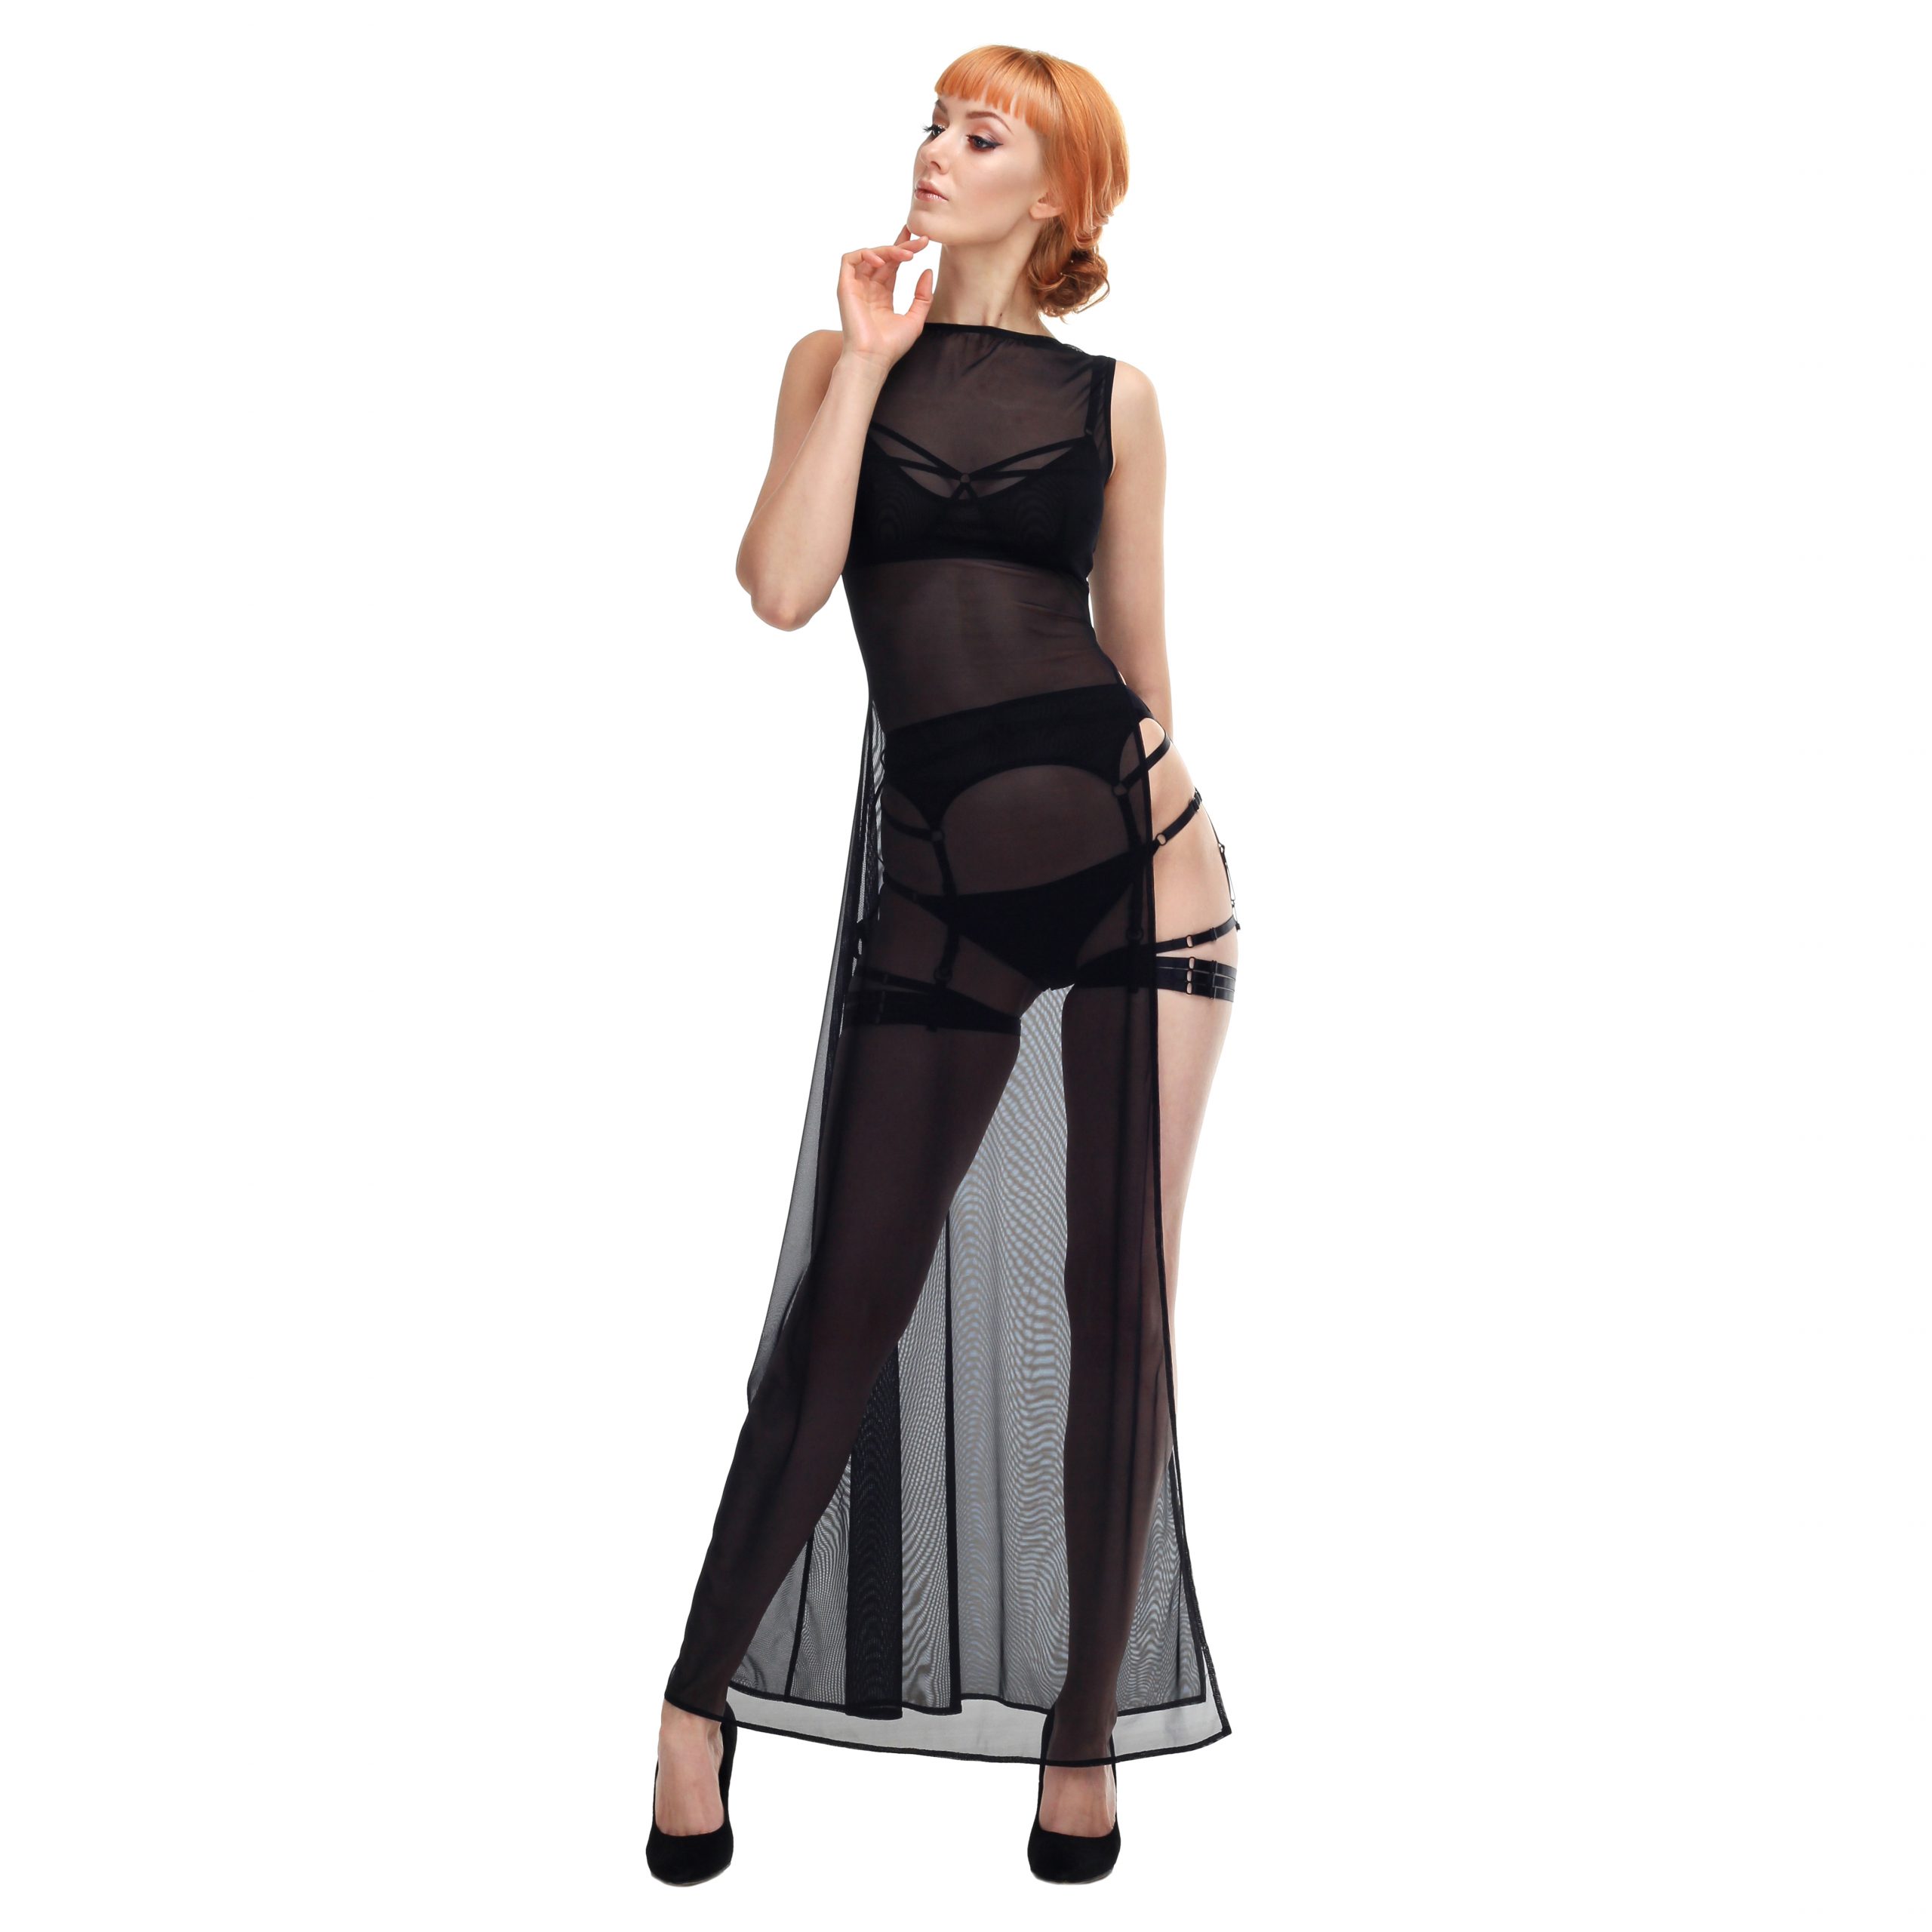 Sheer Black Mesh Long Dress with a Split by Flash you and me